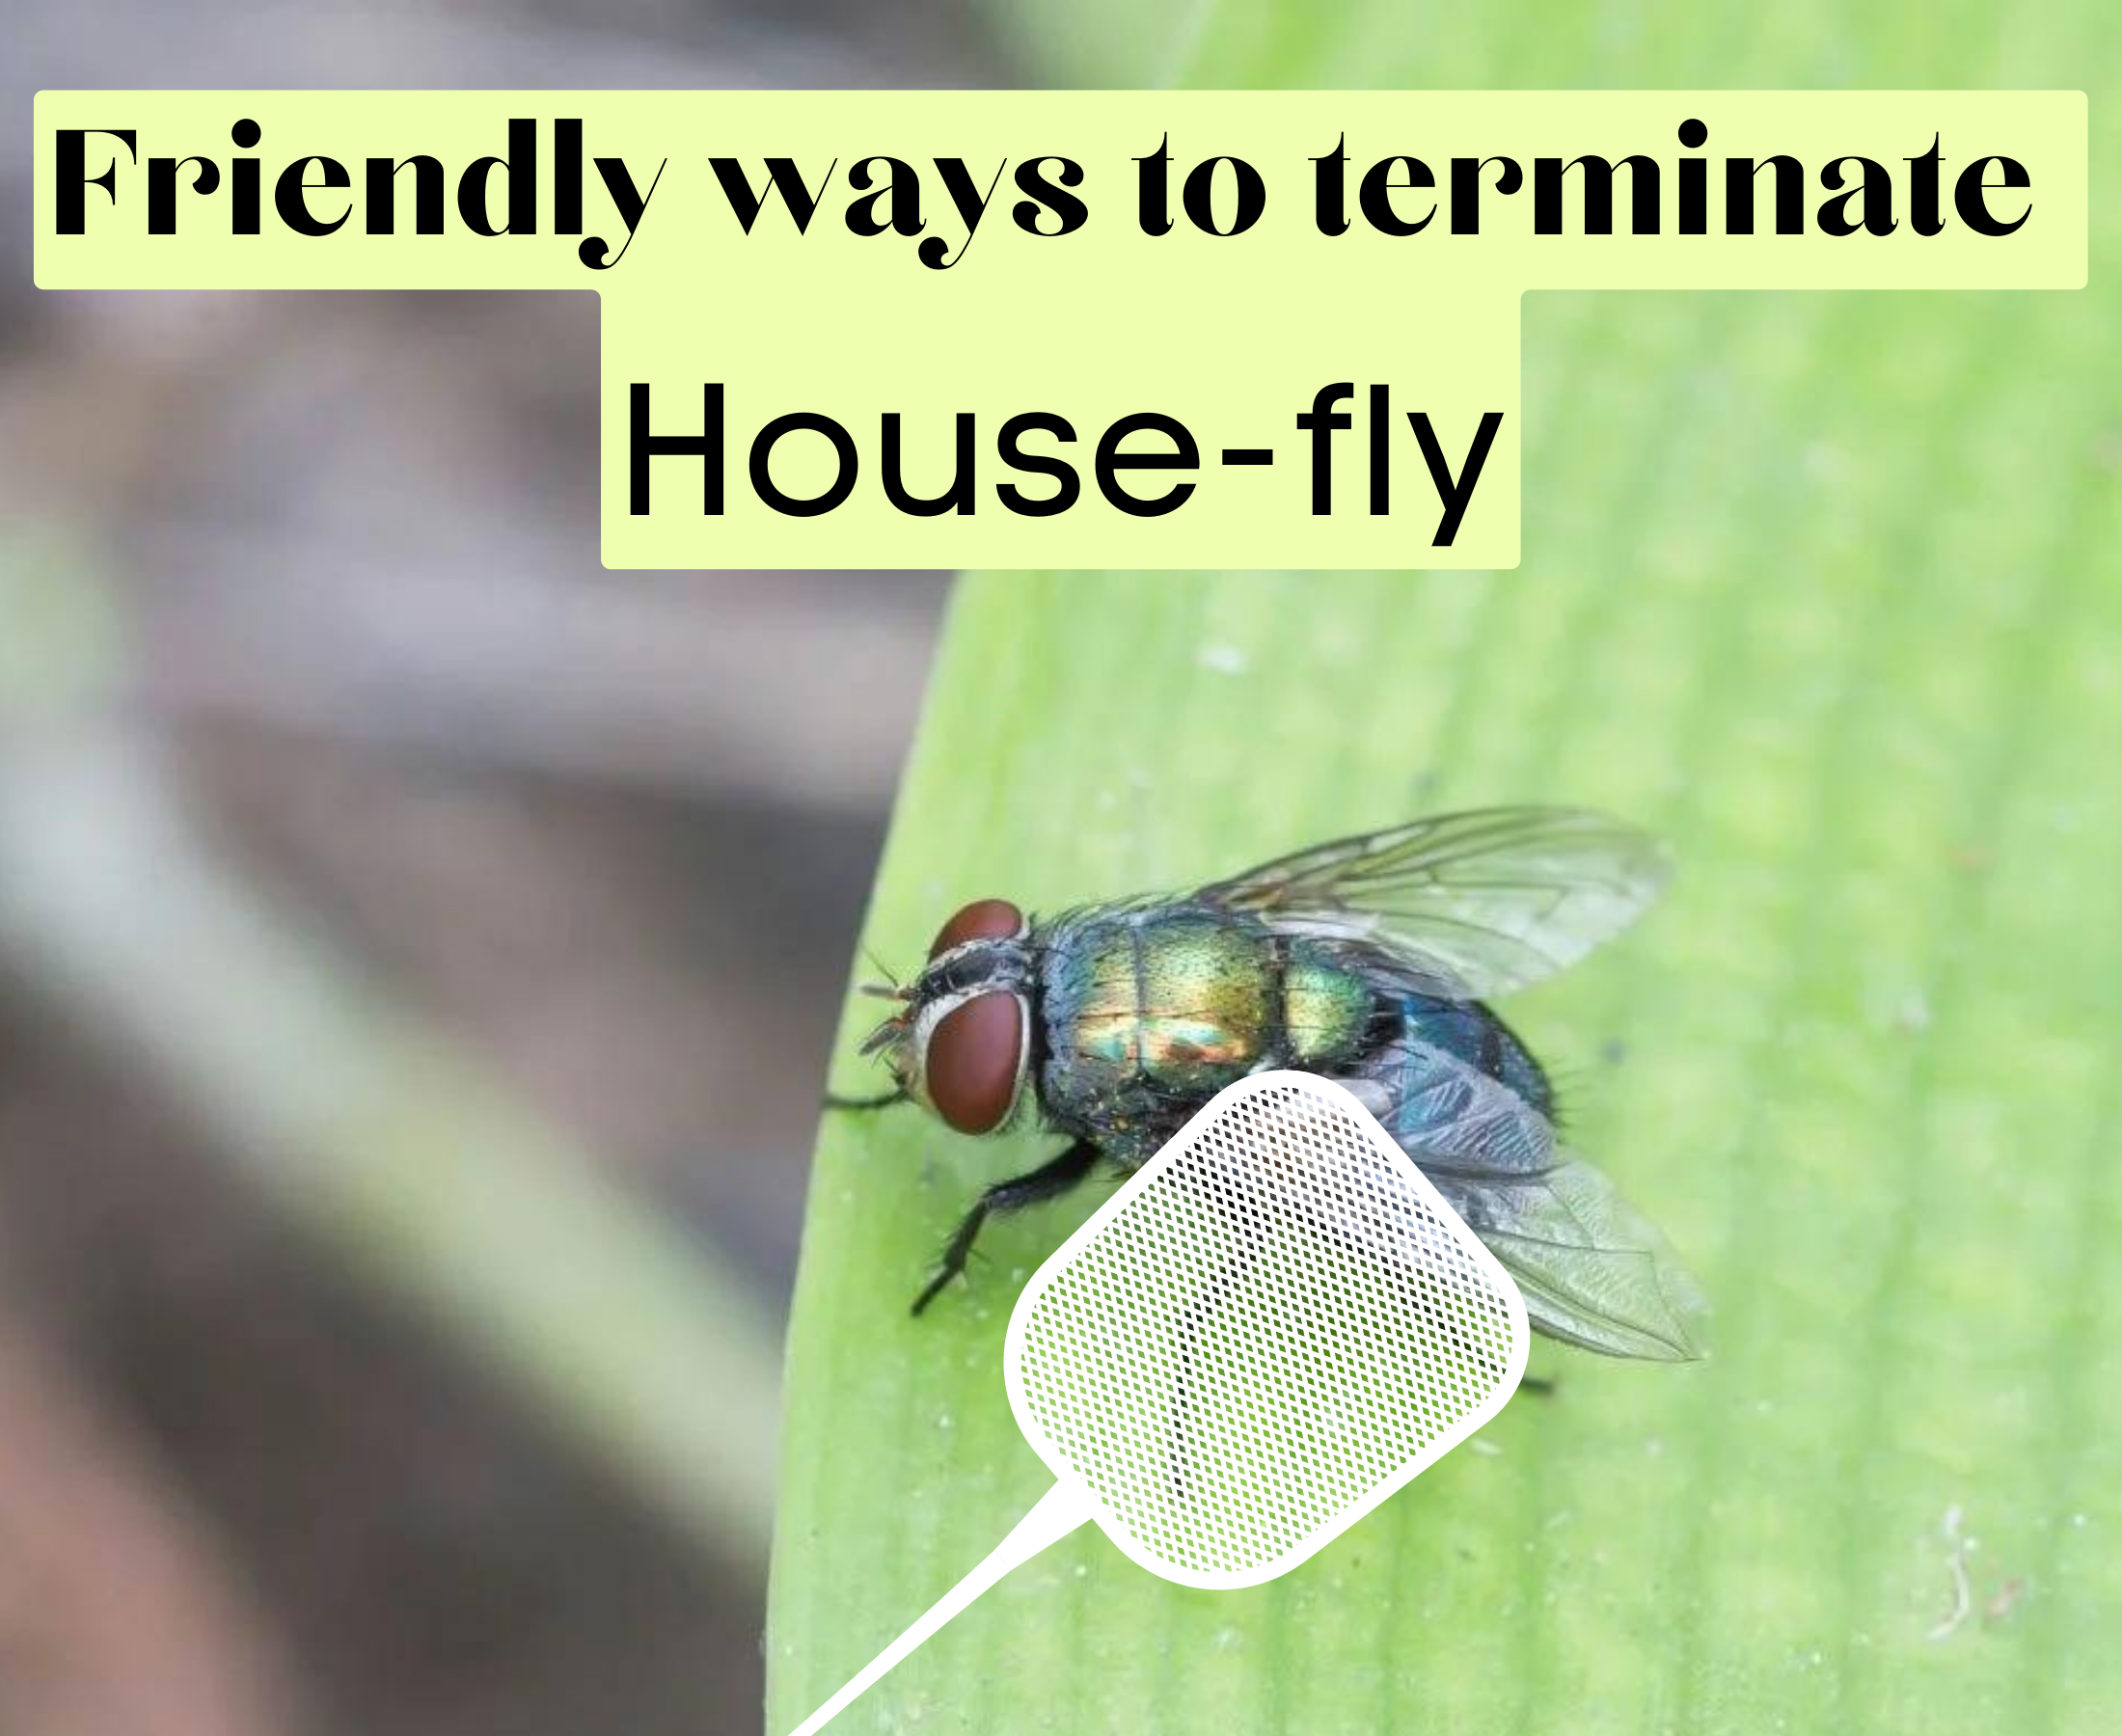 What natural fly repellents work well? How?